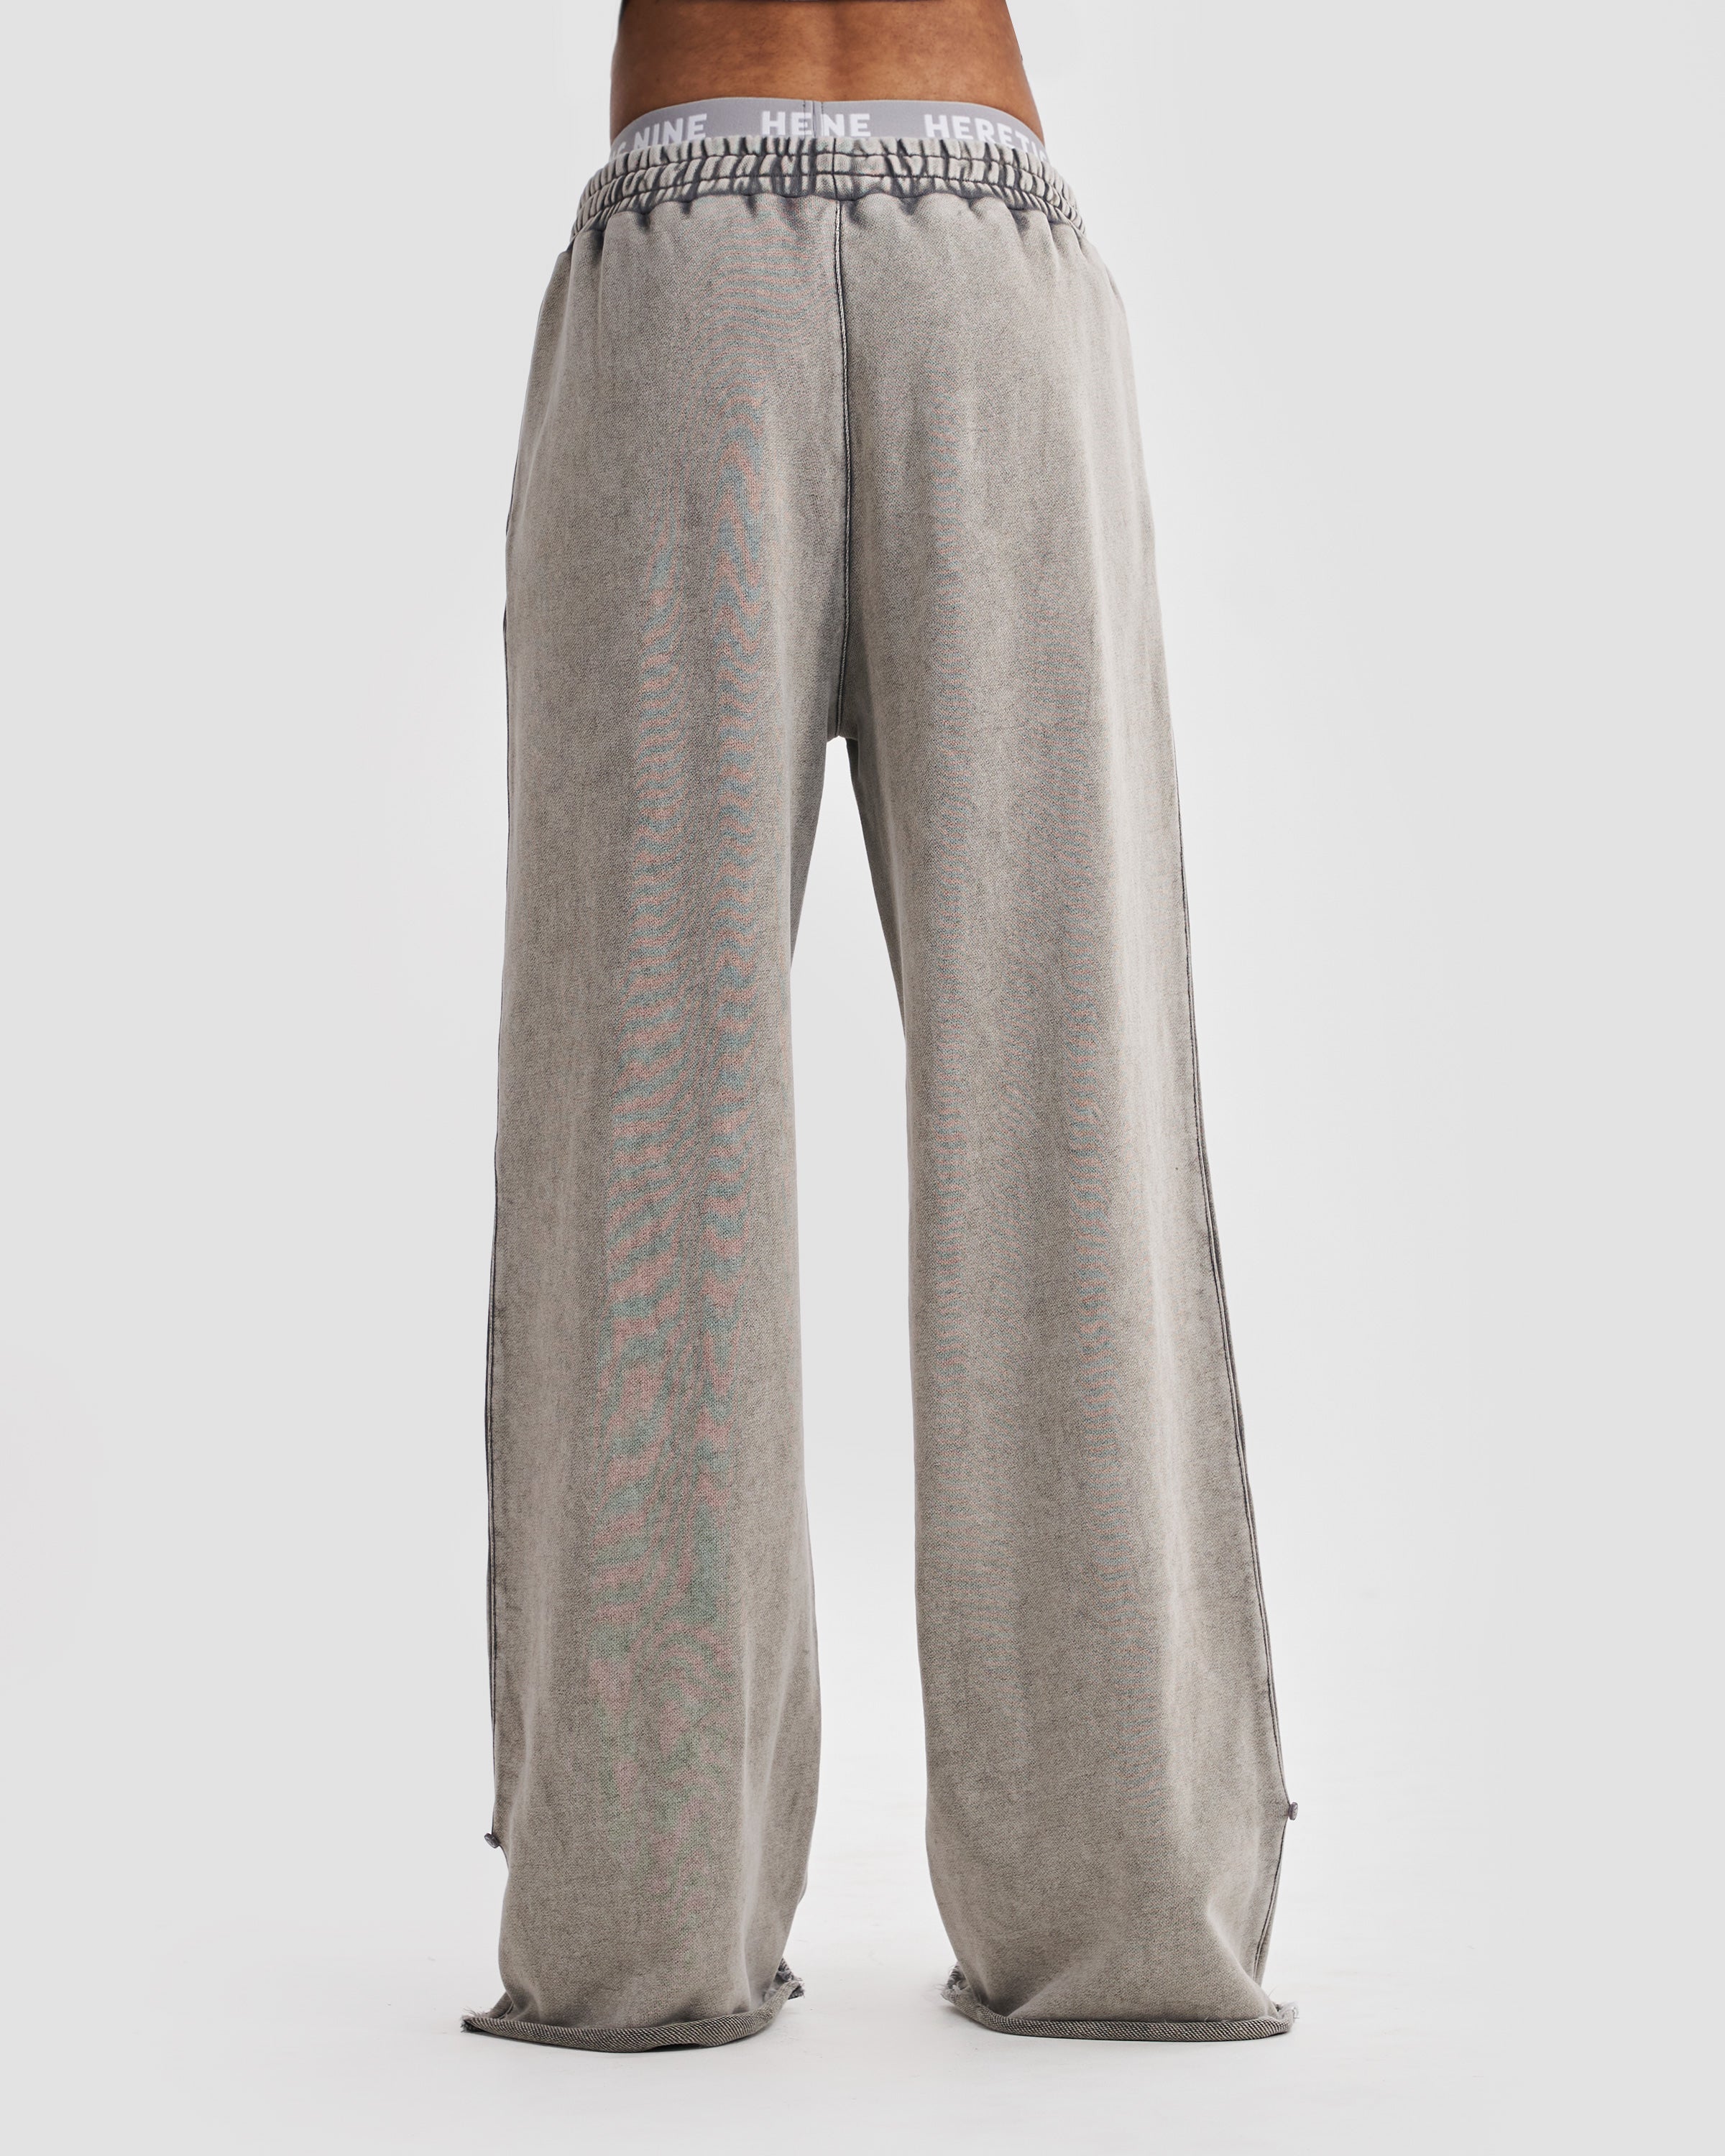 Wide Leg Adjustable Joggers in Stone Washed Grey